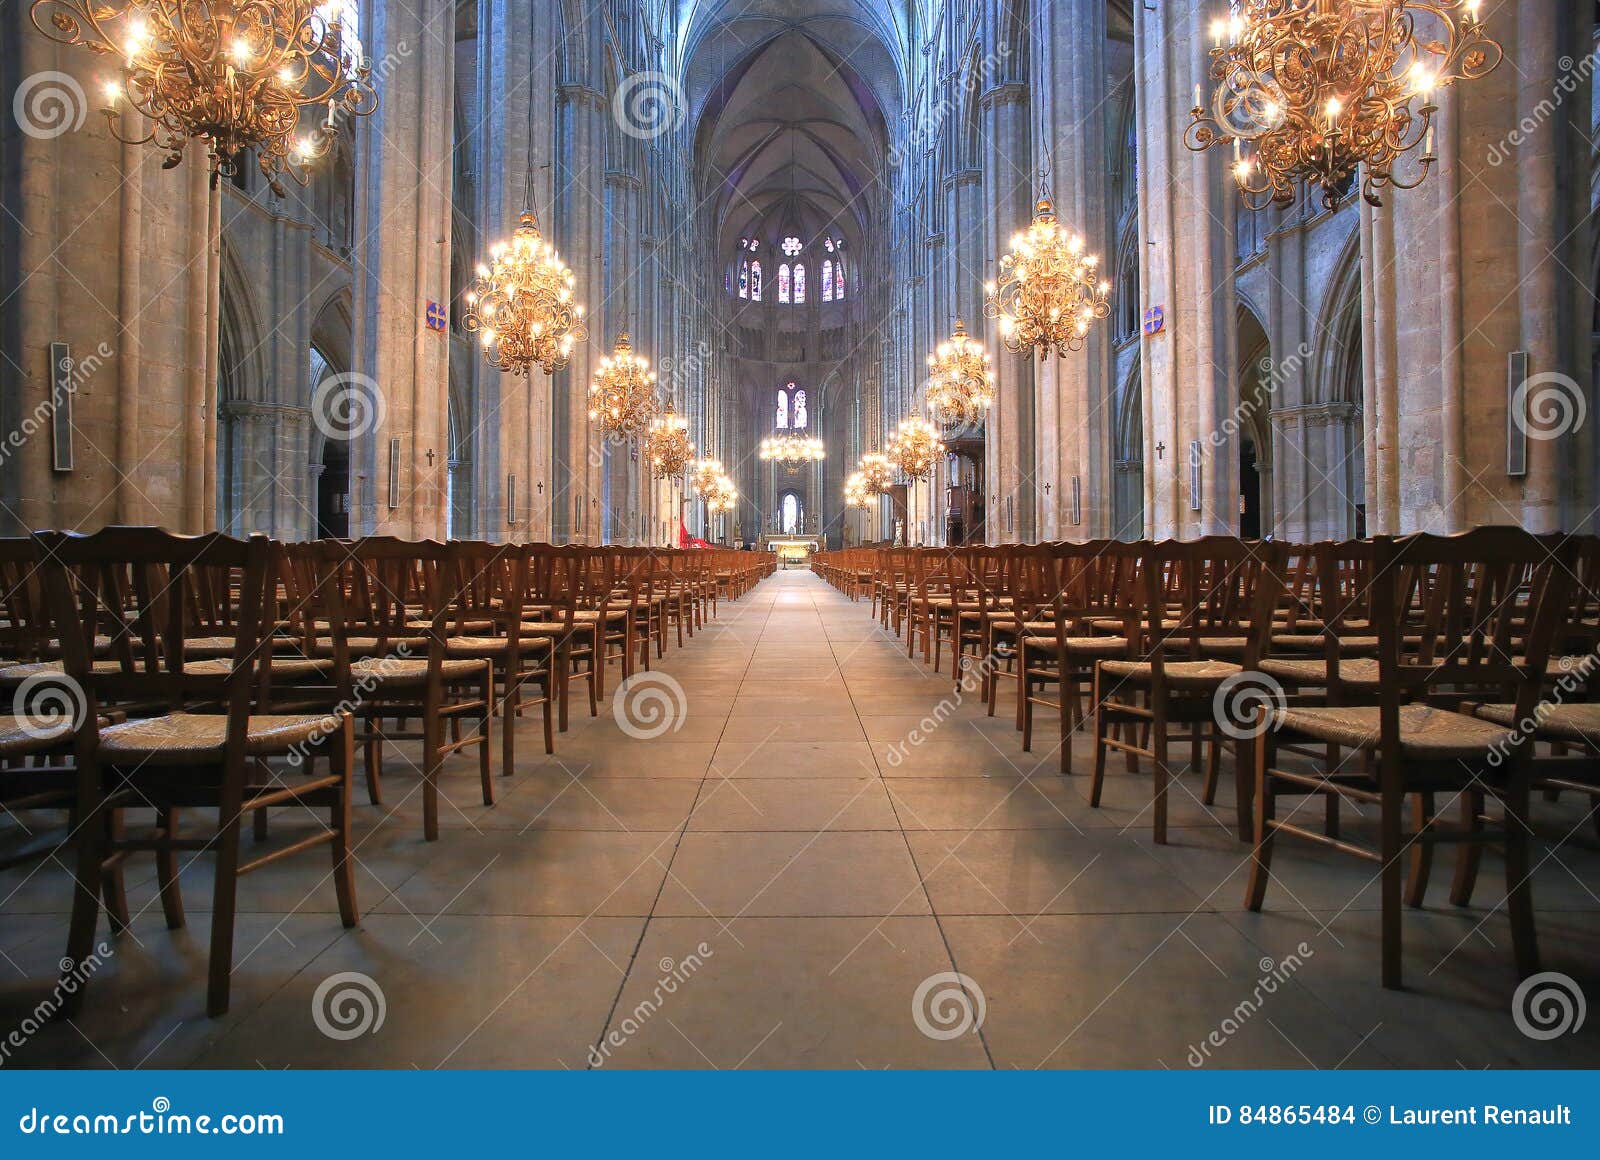 the beautiful nave of cathedral saint-etienne in bourges